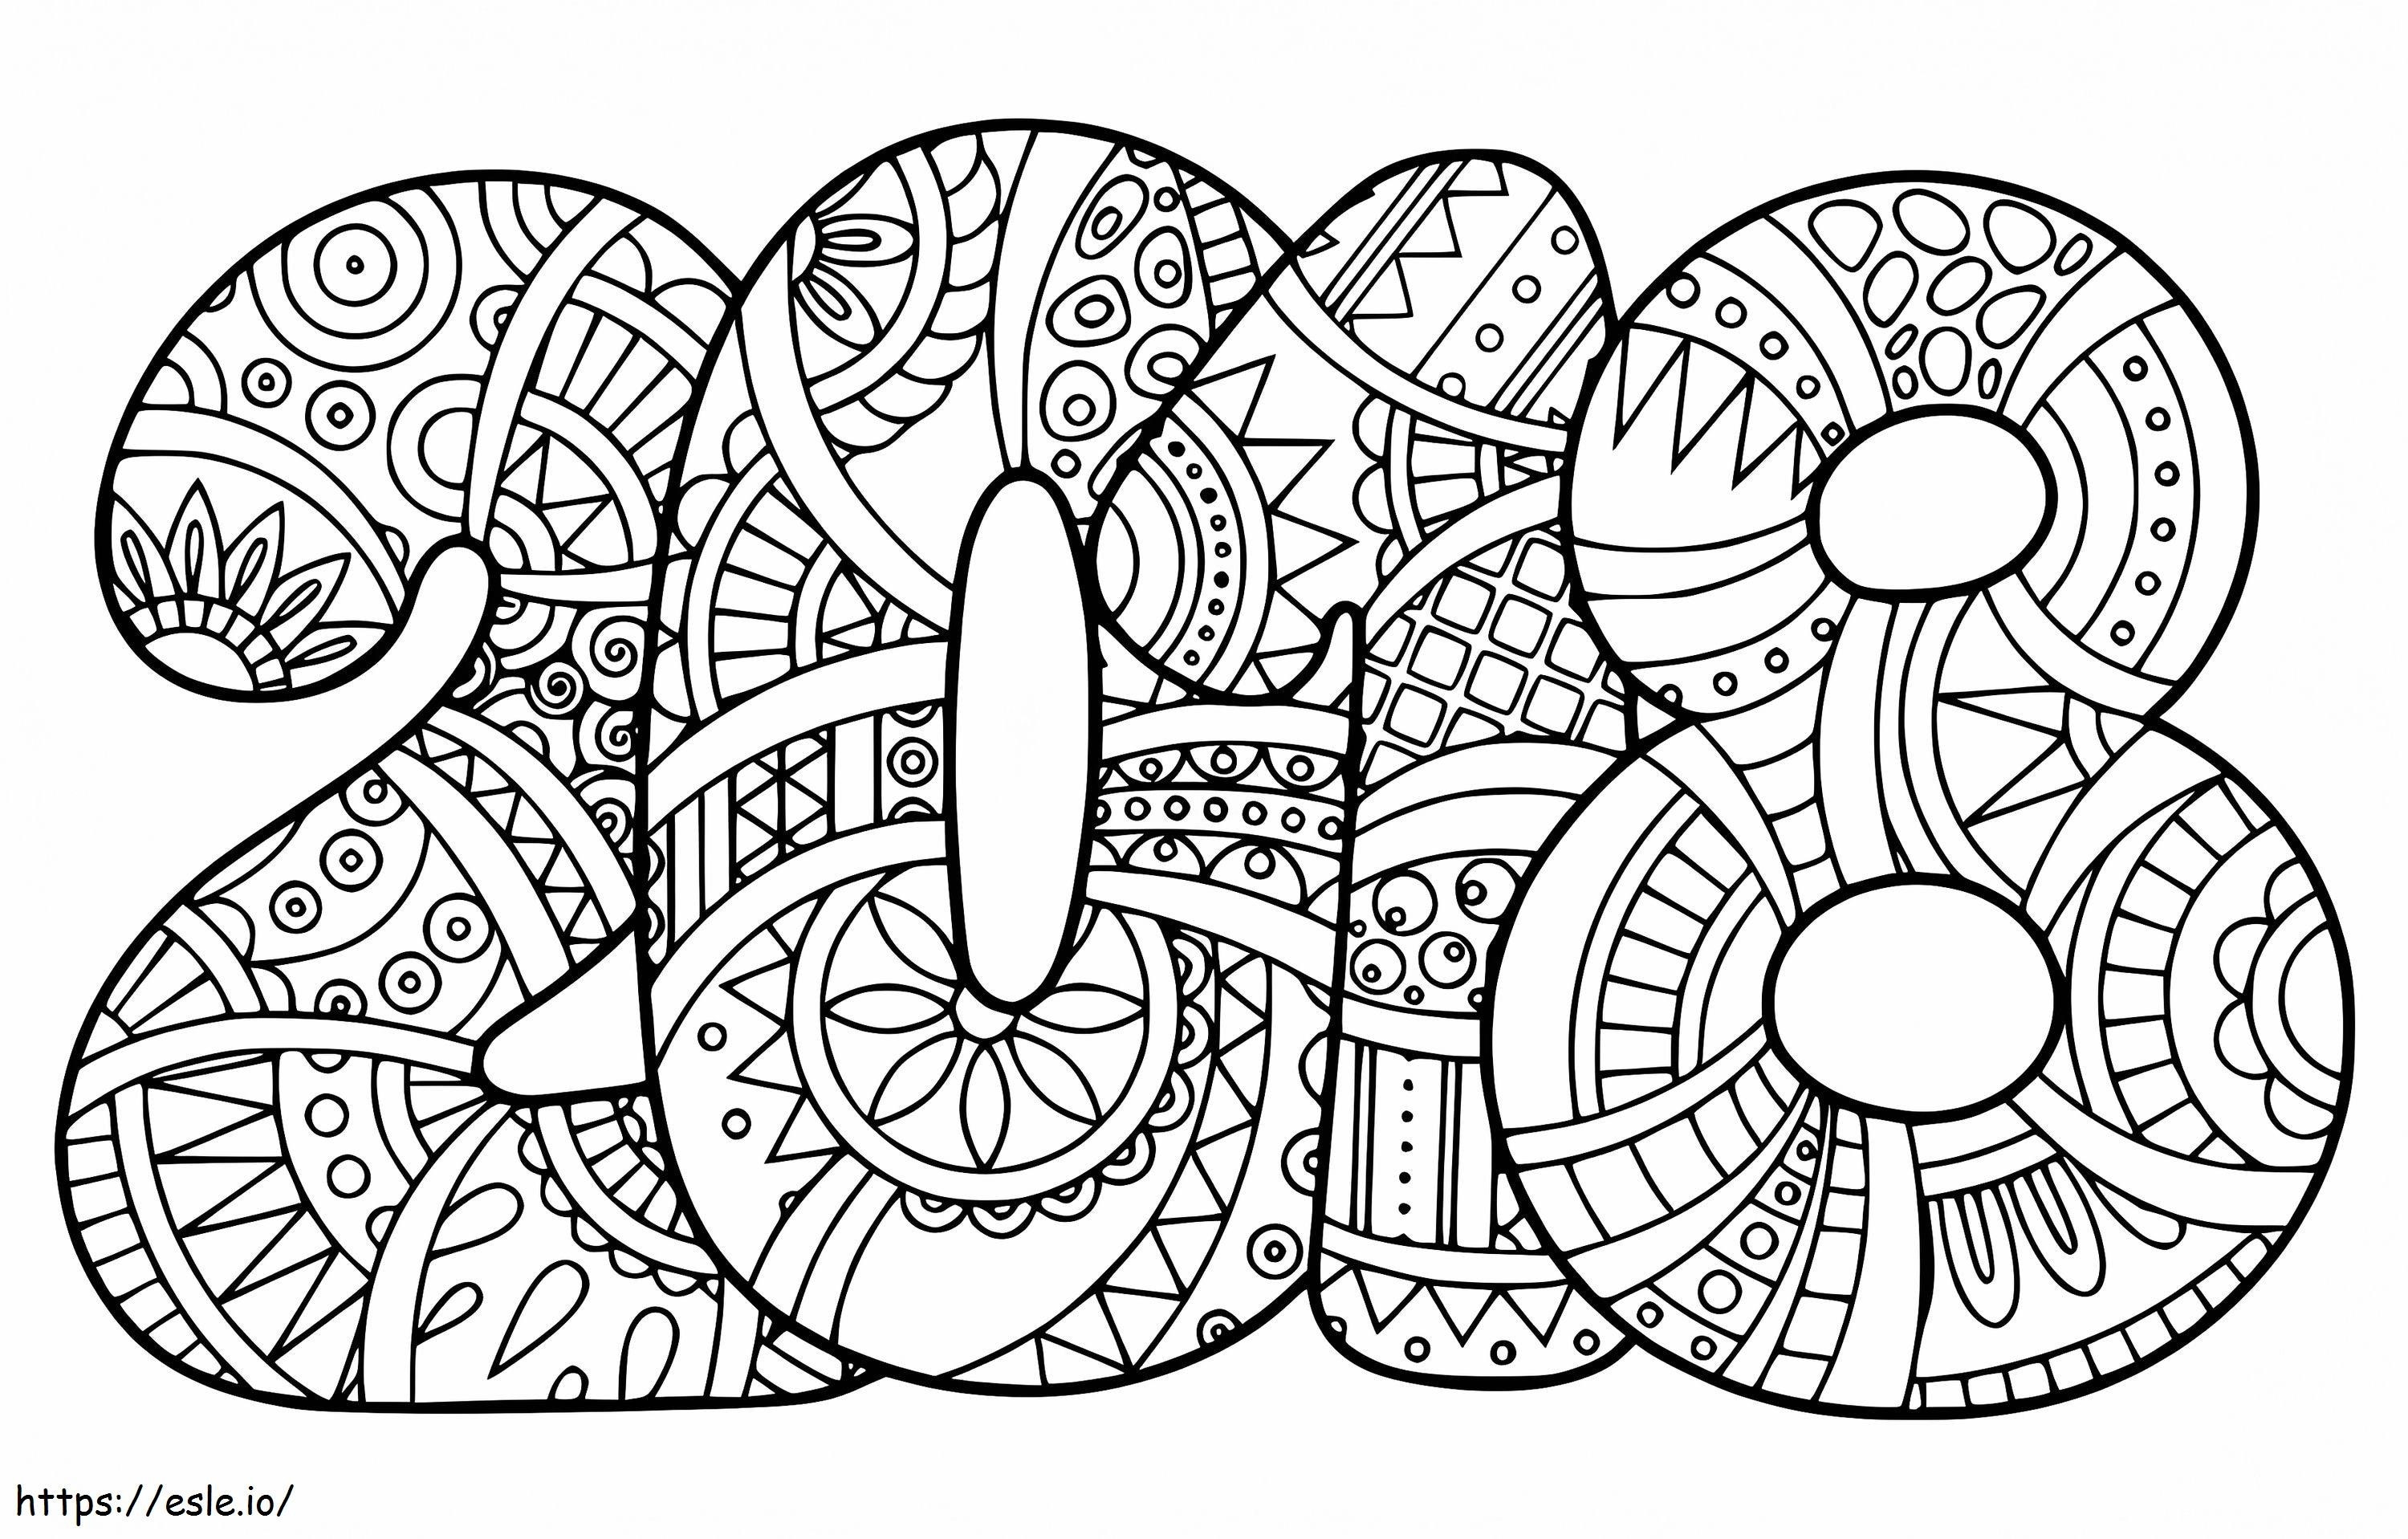 1532137522 New Year 2018 A4 E1600349971823 coloring page